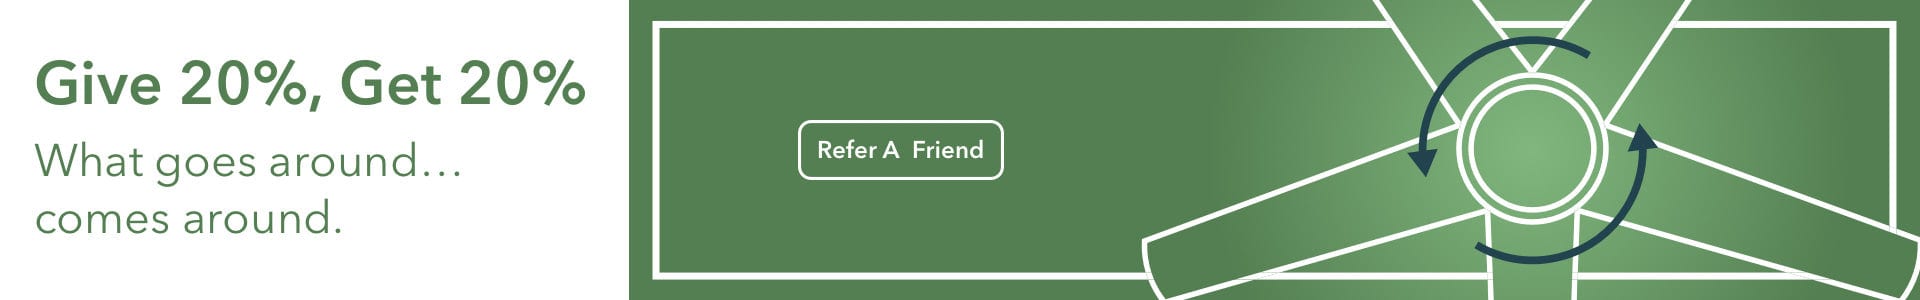 Refer a friend and earn a discount for you and your friend